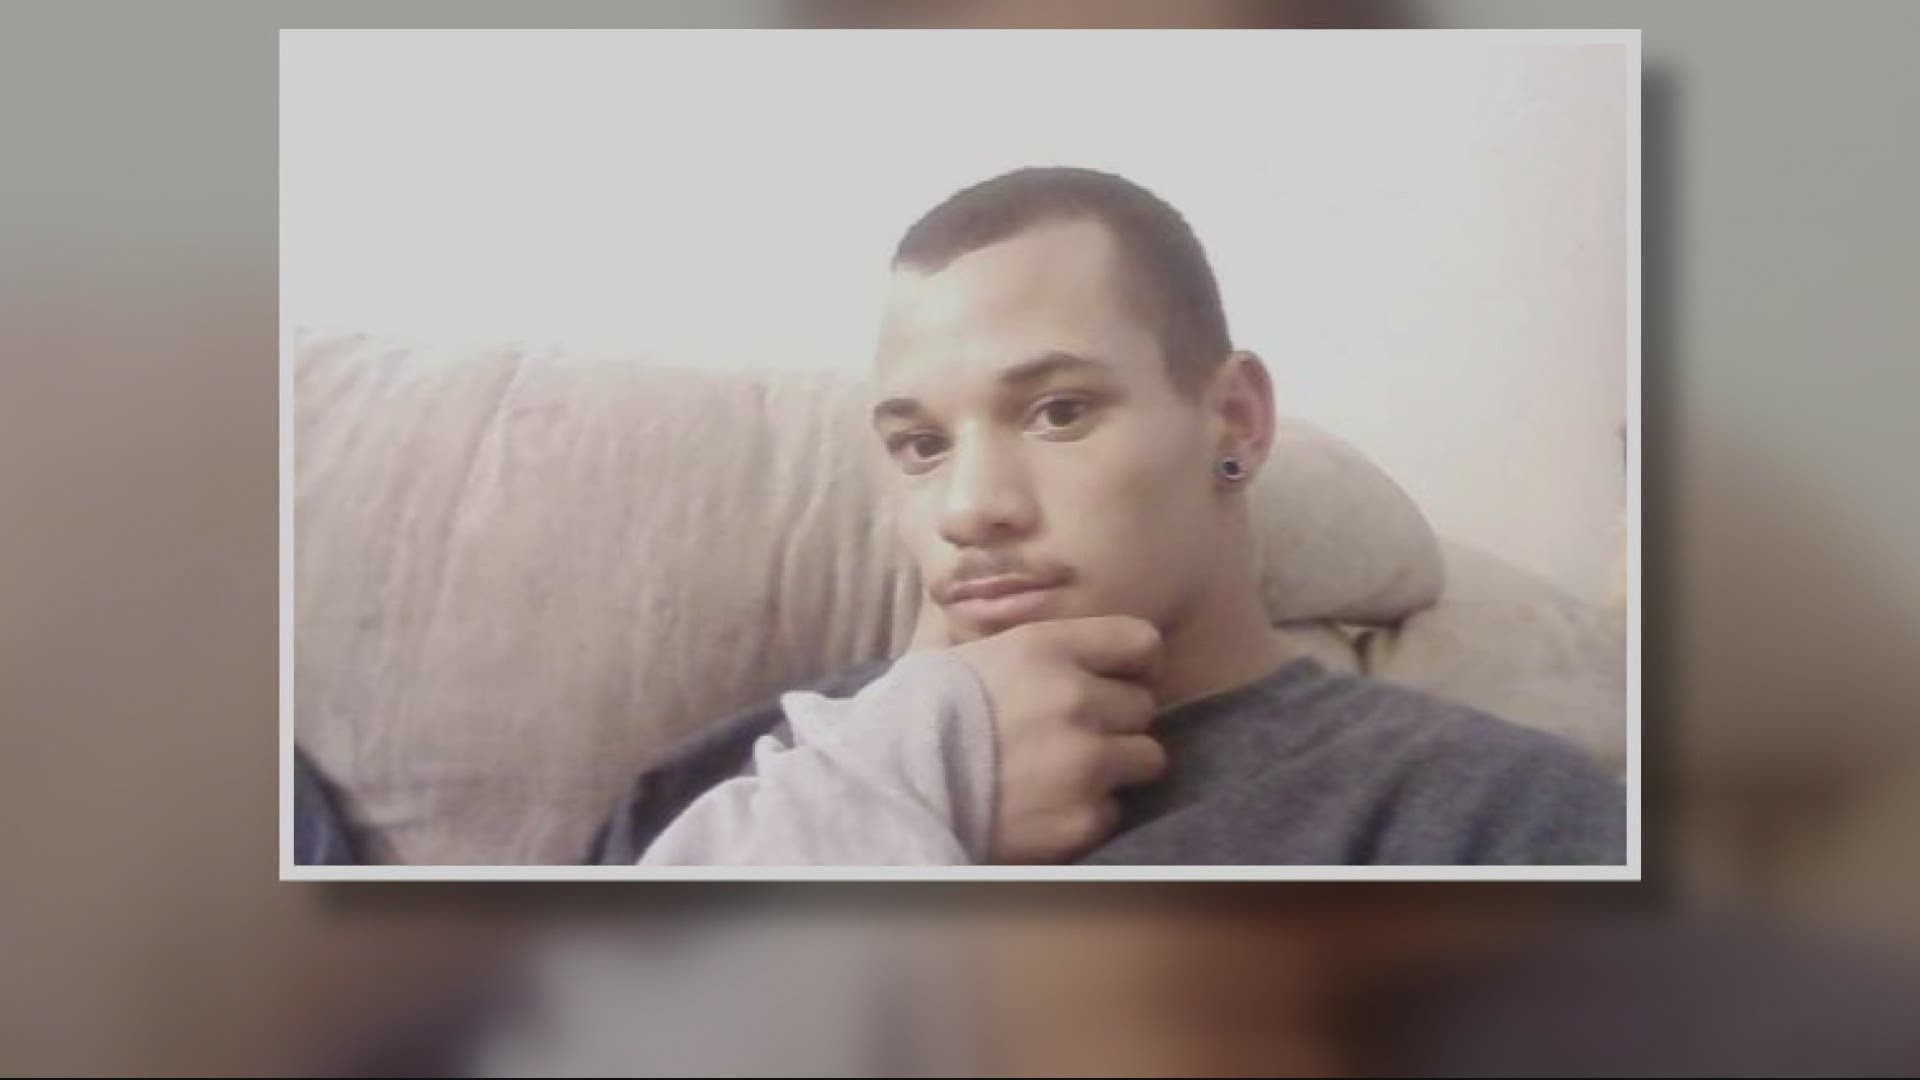 A Clark County deputy shot and killed Jenoah Donald after a traffic stop in February of 2021. Donald's family is now suing the county for $17 million.